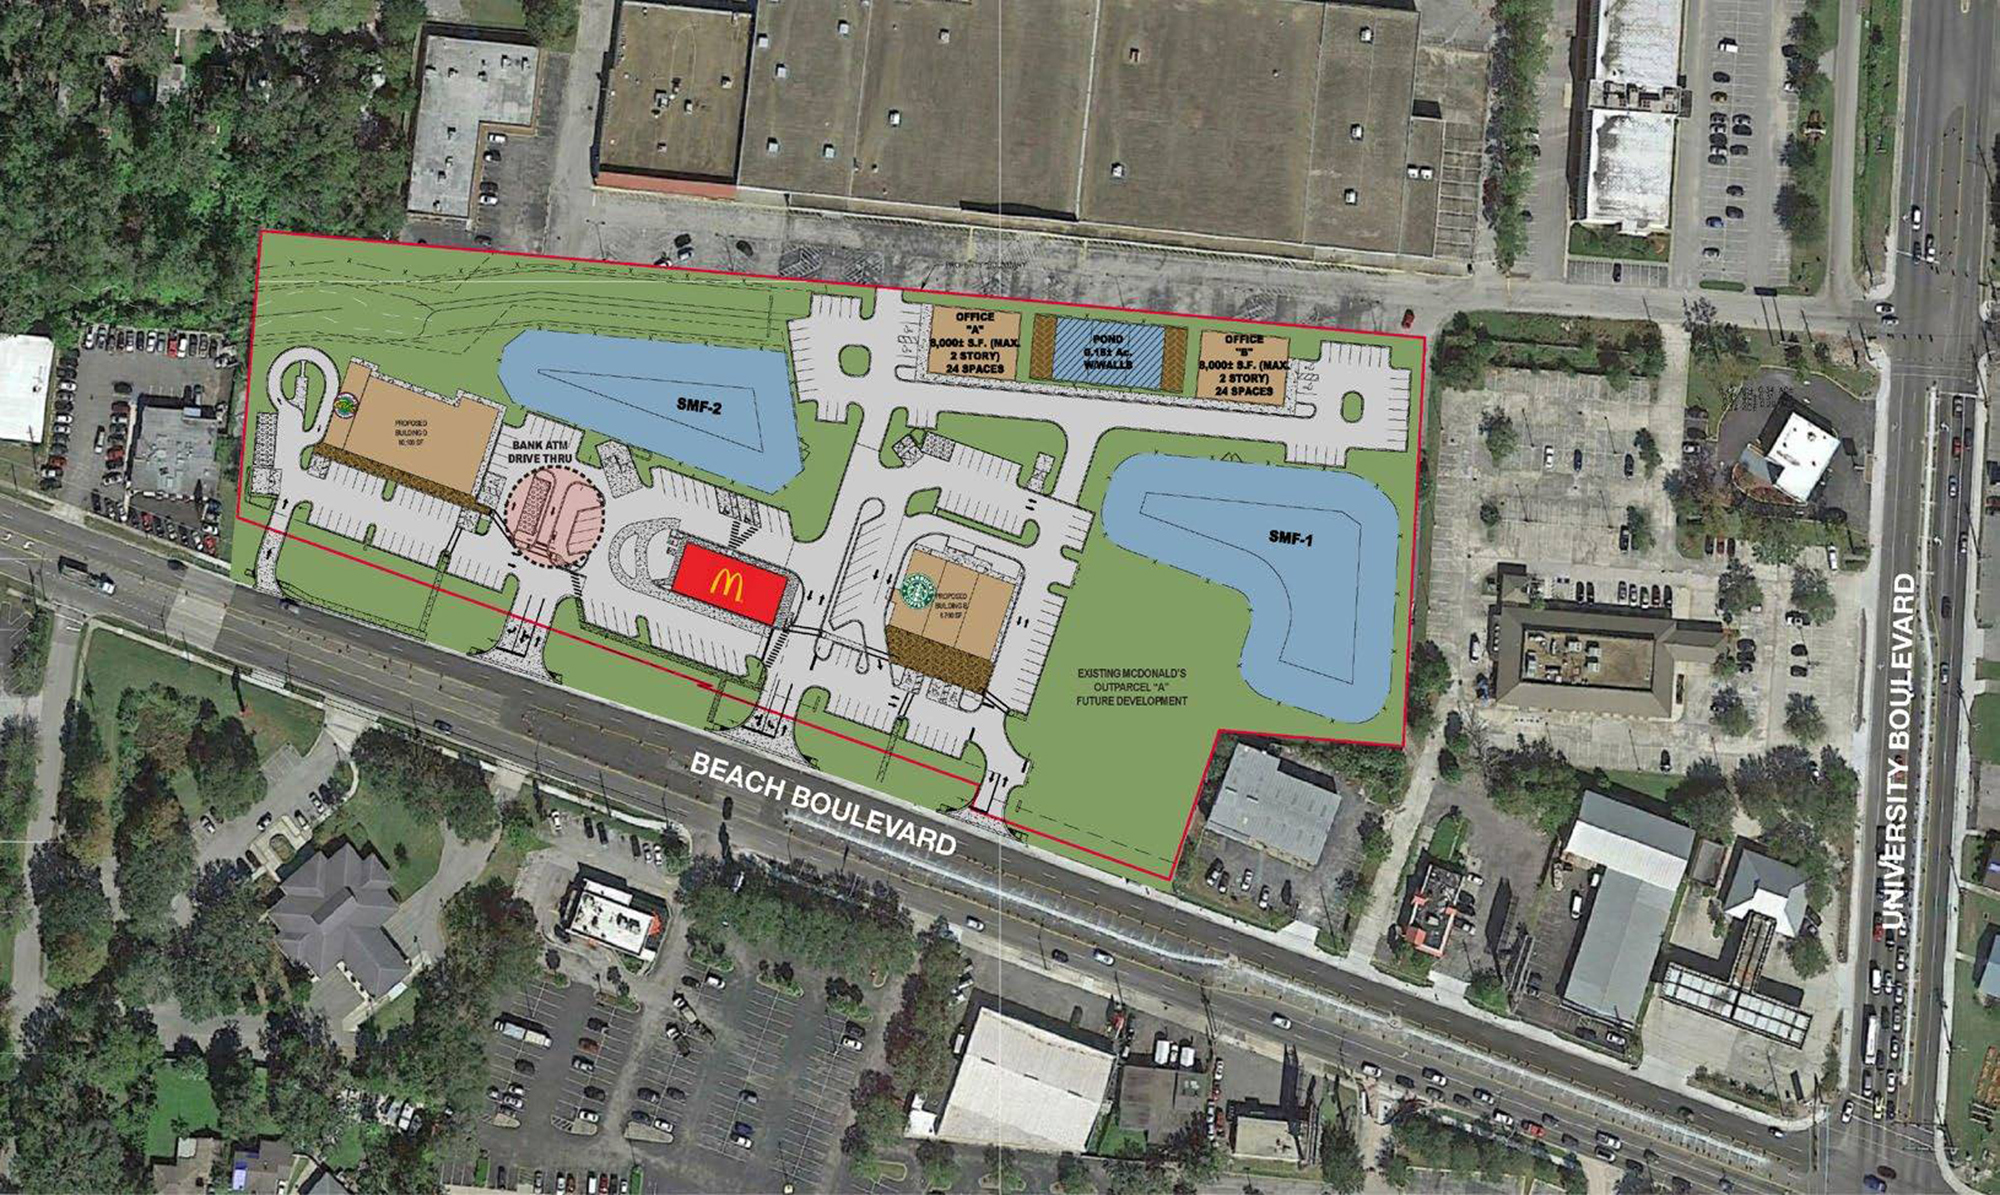 Hallmark Partners is developing the Boulevard Crossing shopping center on the parking lot that served the former Kmart shopping center at Beach and University boulevards.